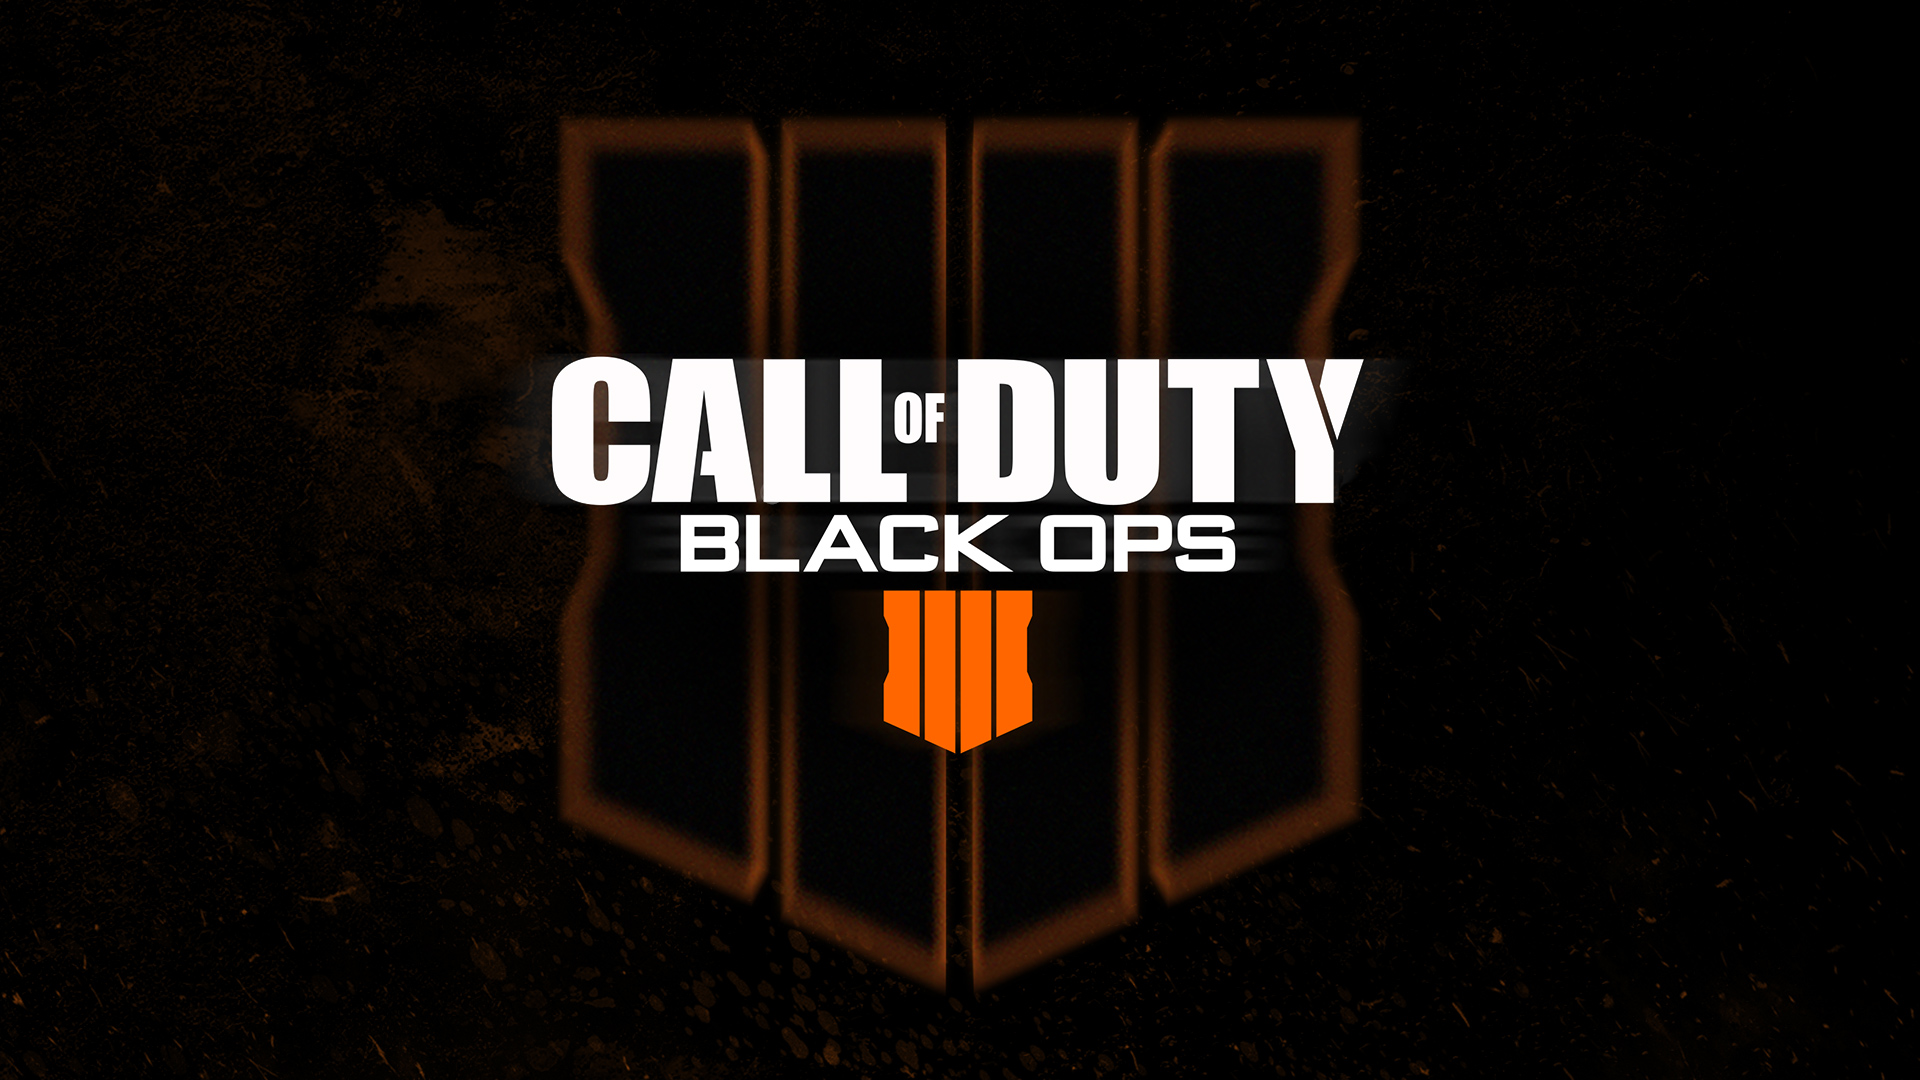 Call Of Duty Black Ops 4 HD Games 4k Wallpapers Images